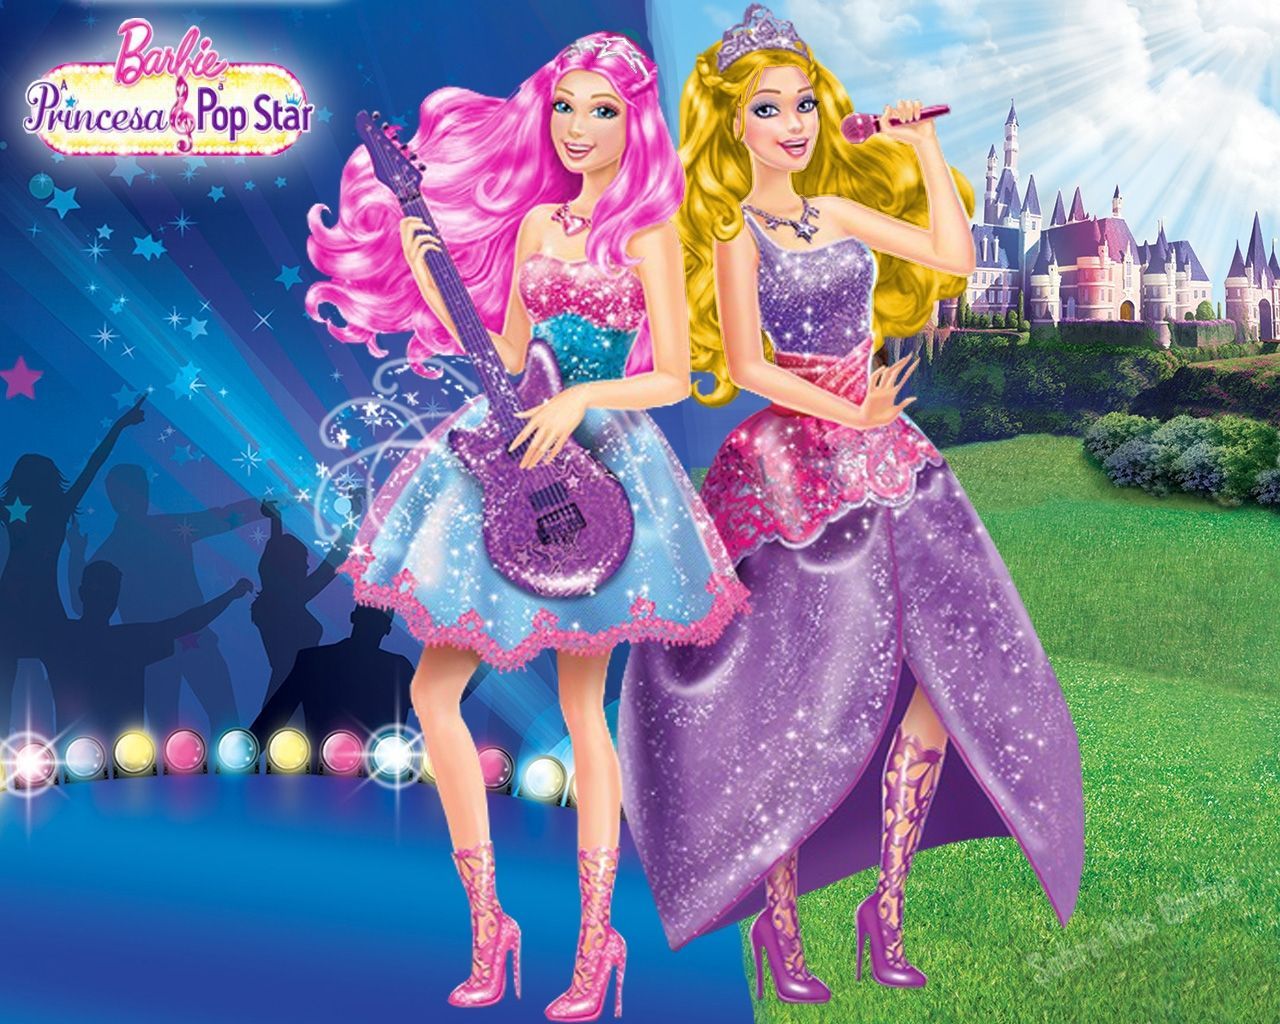 Barbie the Princess and the popstar Wallpaper: Barbie the Princess and the Popstar Wallpaper. Barbie party, Barbie, Barbie princess